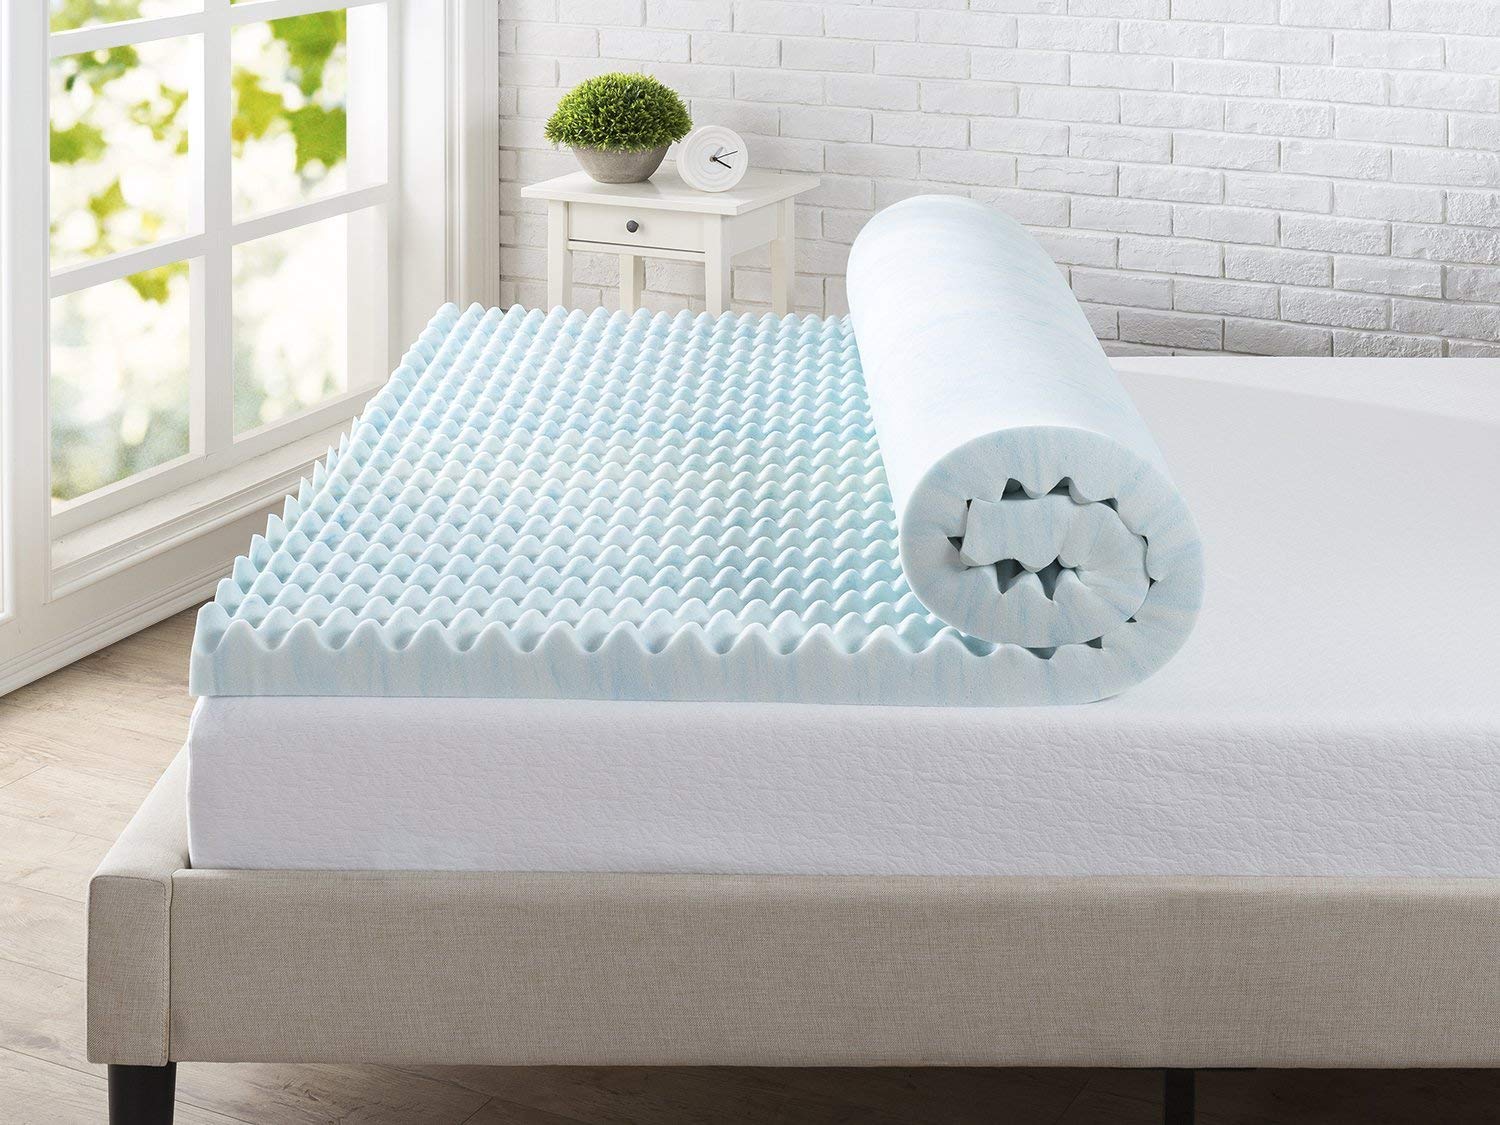 firm mattress with separate pillow topper